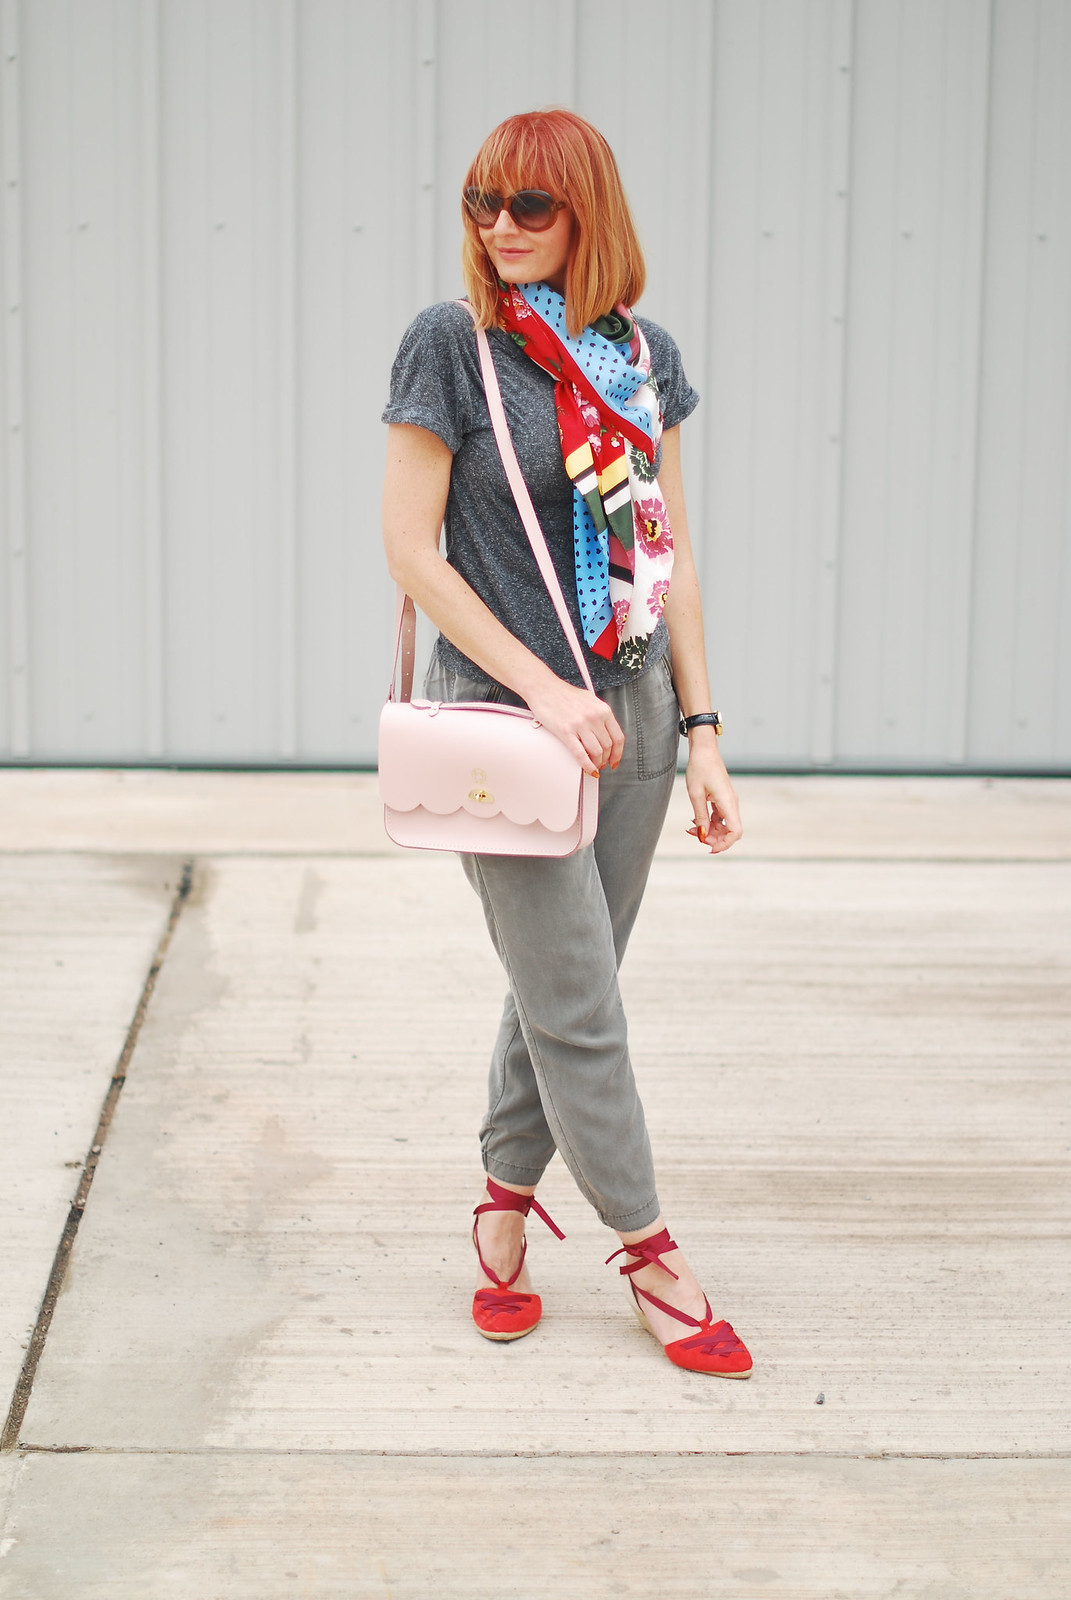 Simple grey and khaki outfit accessorised with brights: Multicoloured scarf, pink satchel bag, red lace-up espadrilles | Not Dressed As Lamb, over 40 style